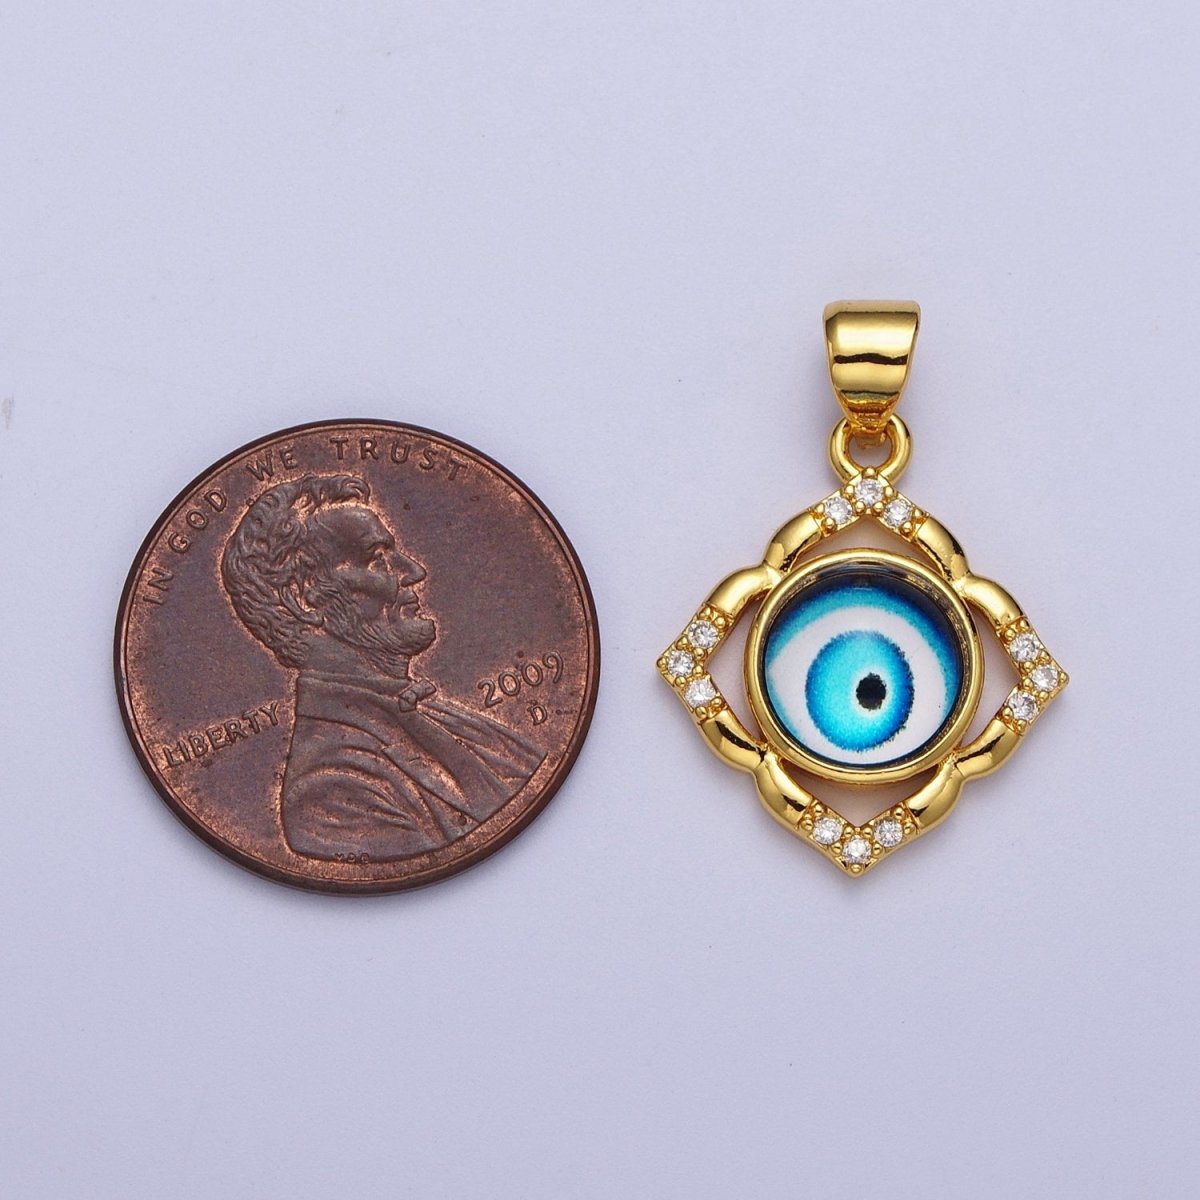 Bright Blue Evil Eye Gold Floral Patterned Pendant, 24K Gold Filled Blue Hypnotic Eye of Ra Clear Micro Paved CZ Florette Charm | X-685 - DLUXCA